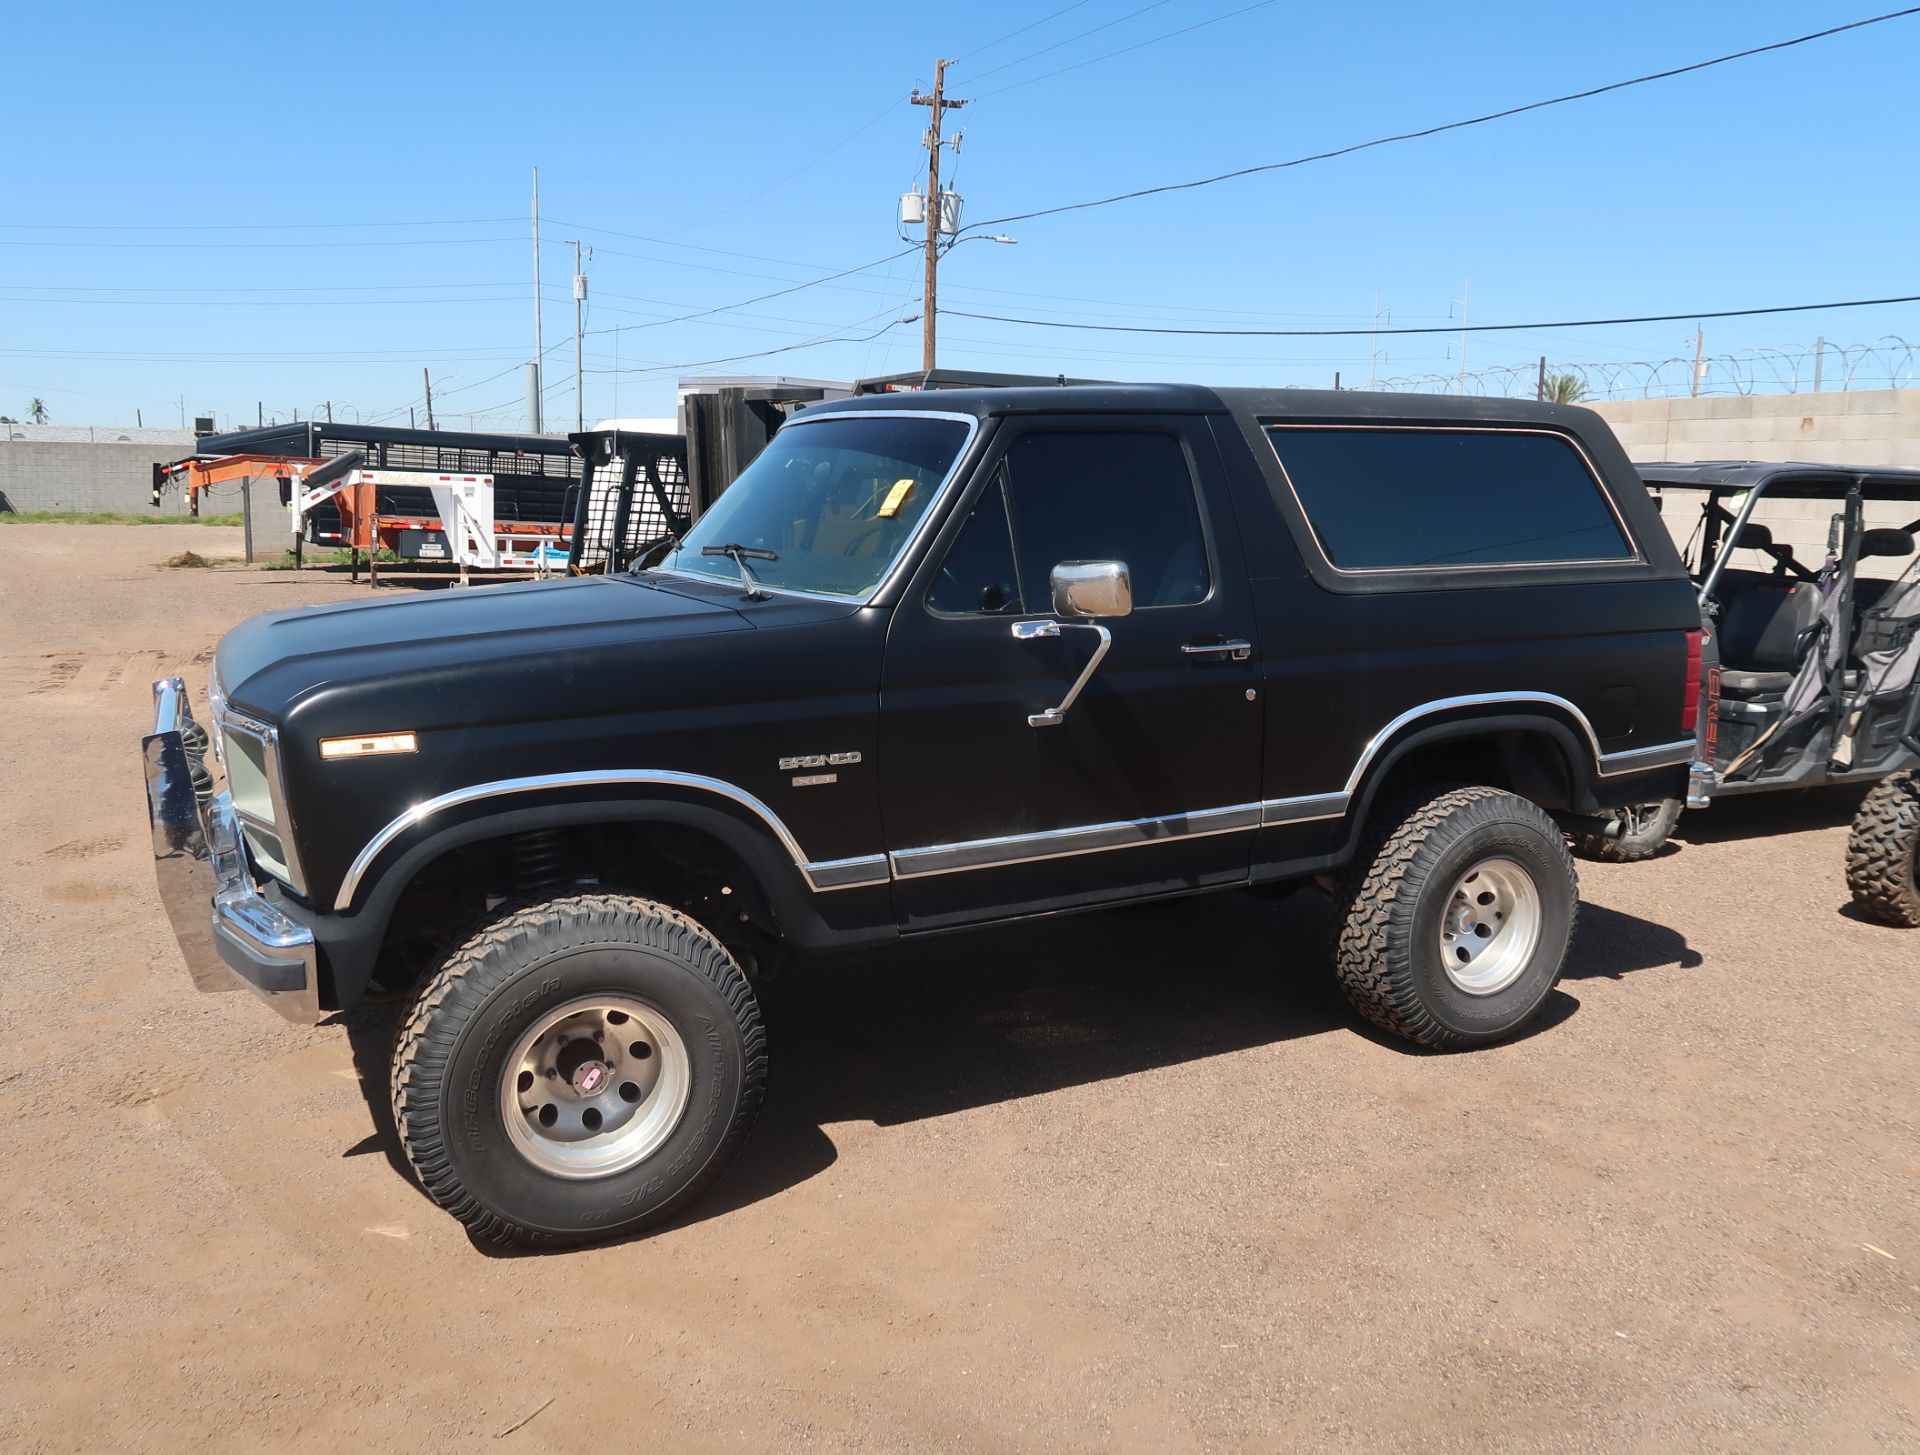 1986 FORD BRONCO, V8, 351W, RUNS AND DRIVES, VEHICLE HAS NOT BEEN THROUGH EMISSIONS FOR 3 YEARS (